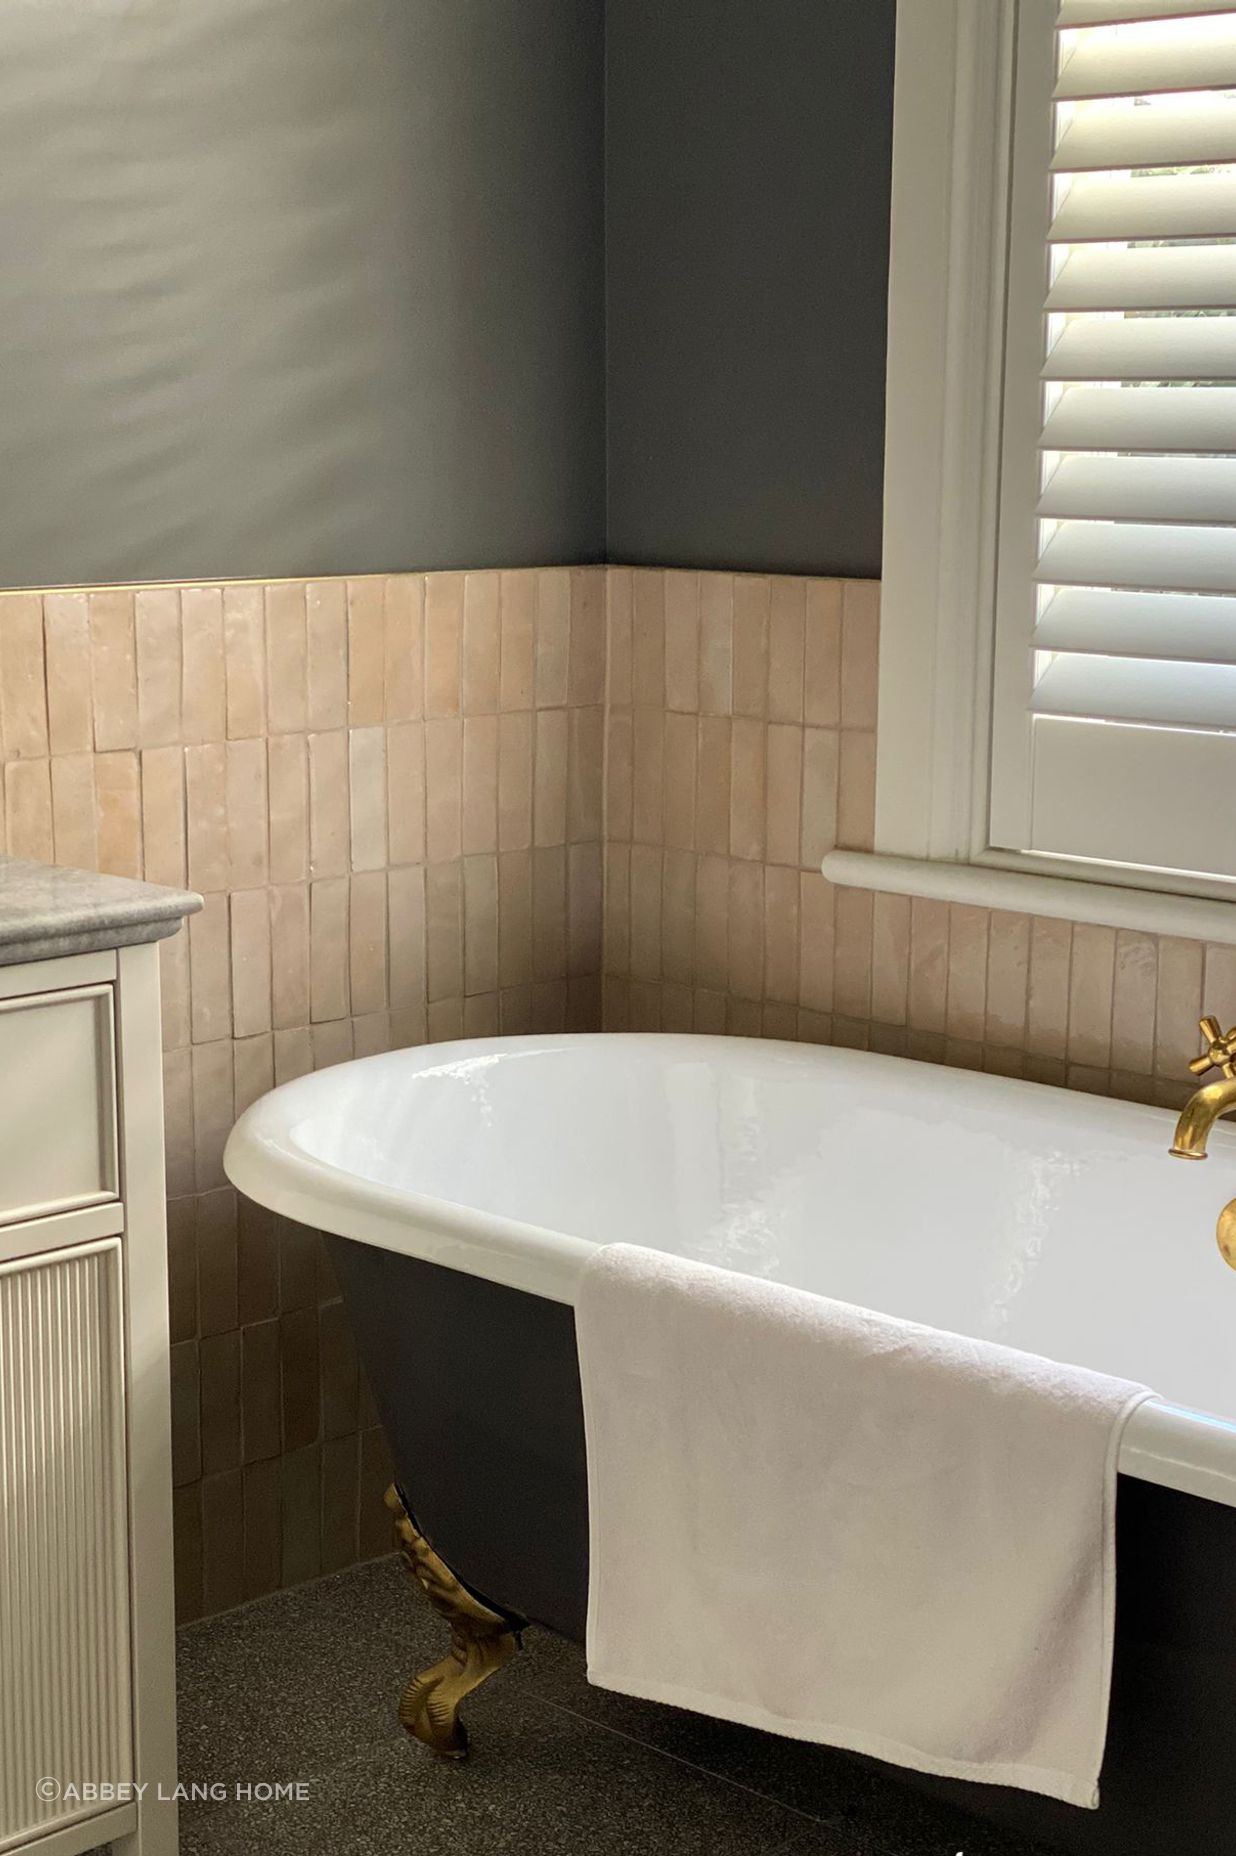 The serene single-toned palette of these zellige tiles contrasts against the bath in this Abbey Lang Home bathroom.